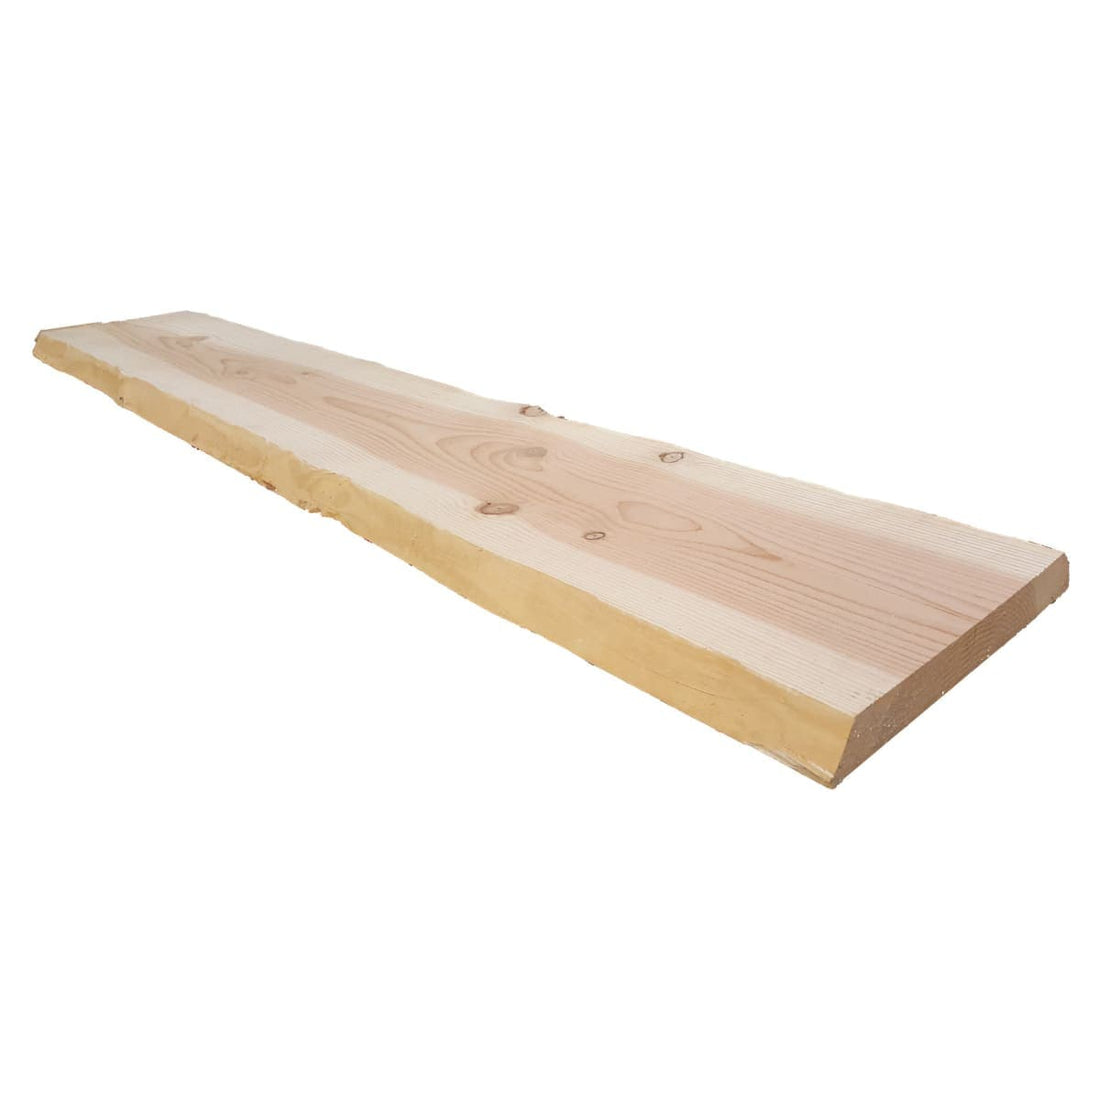 WOODEN BOARD 200X30/38 CM THICKNESS 50 MM - best price from Maltashopper.com BR440001520